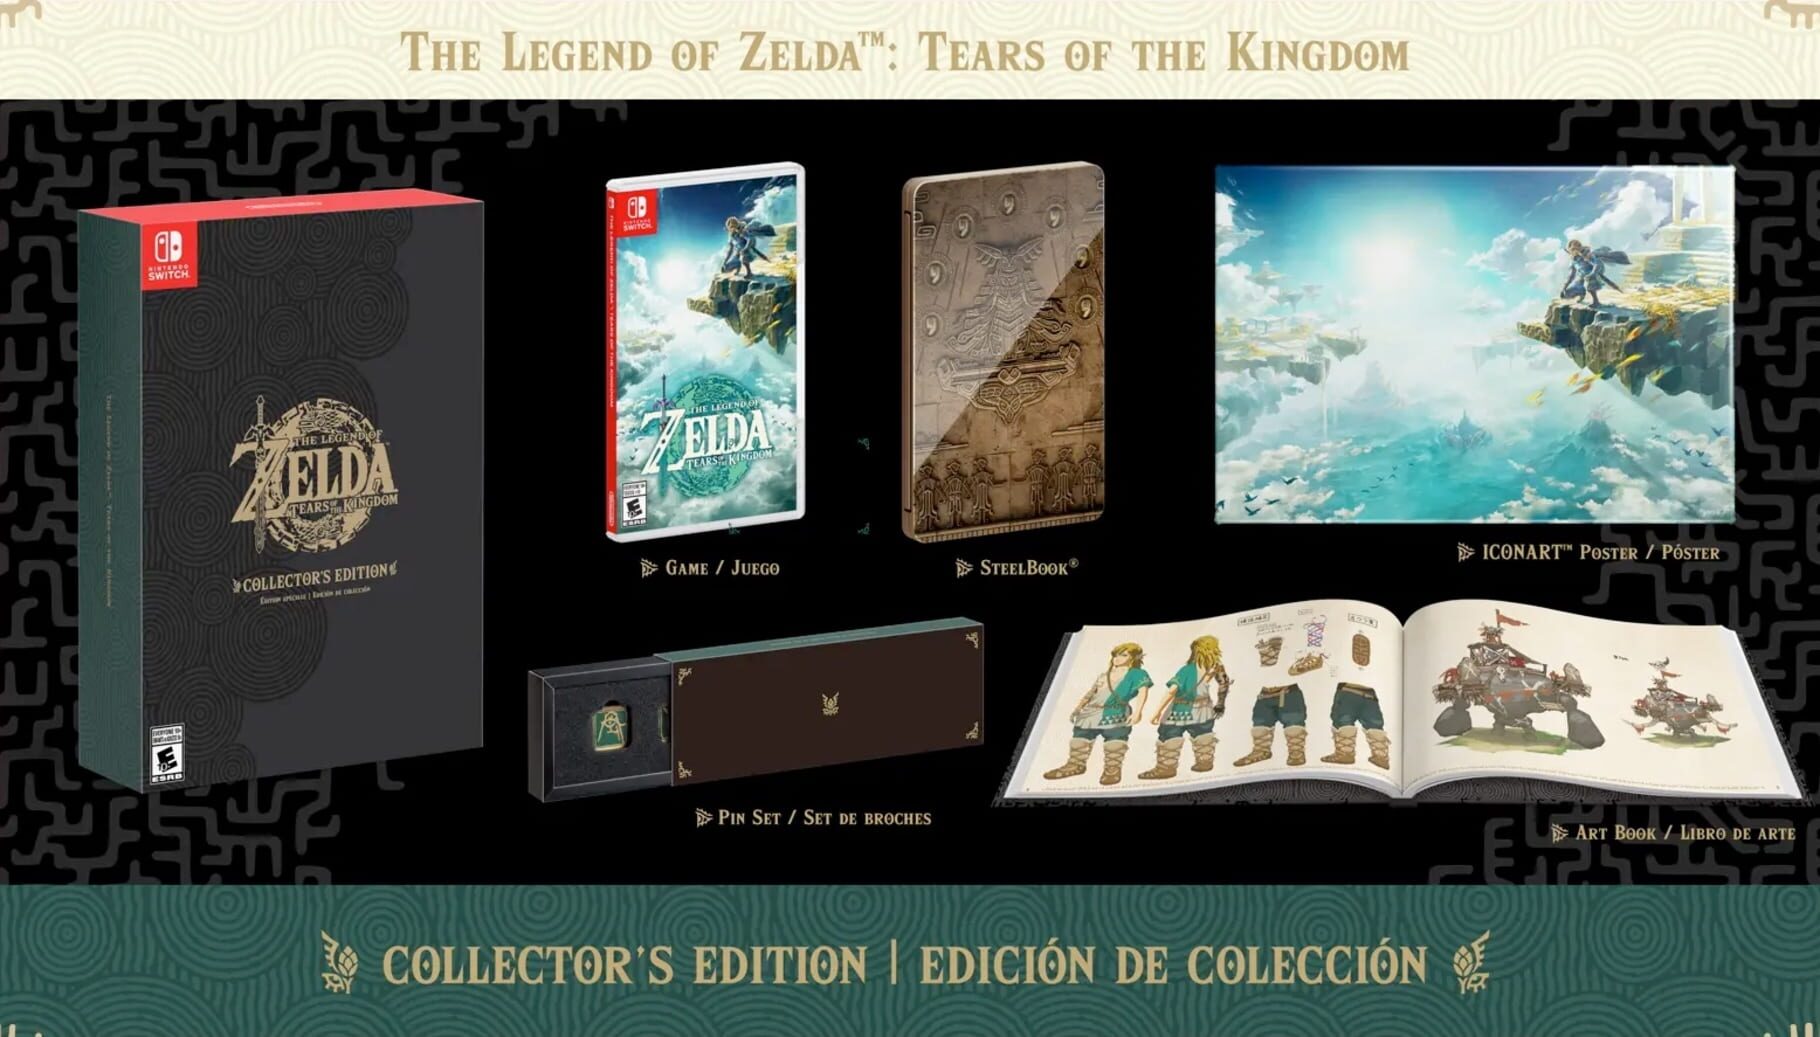 Arte - The Legend of Zelda: Tears of the Kingdom - Collector's Edition